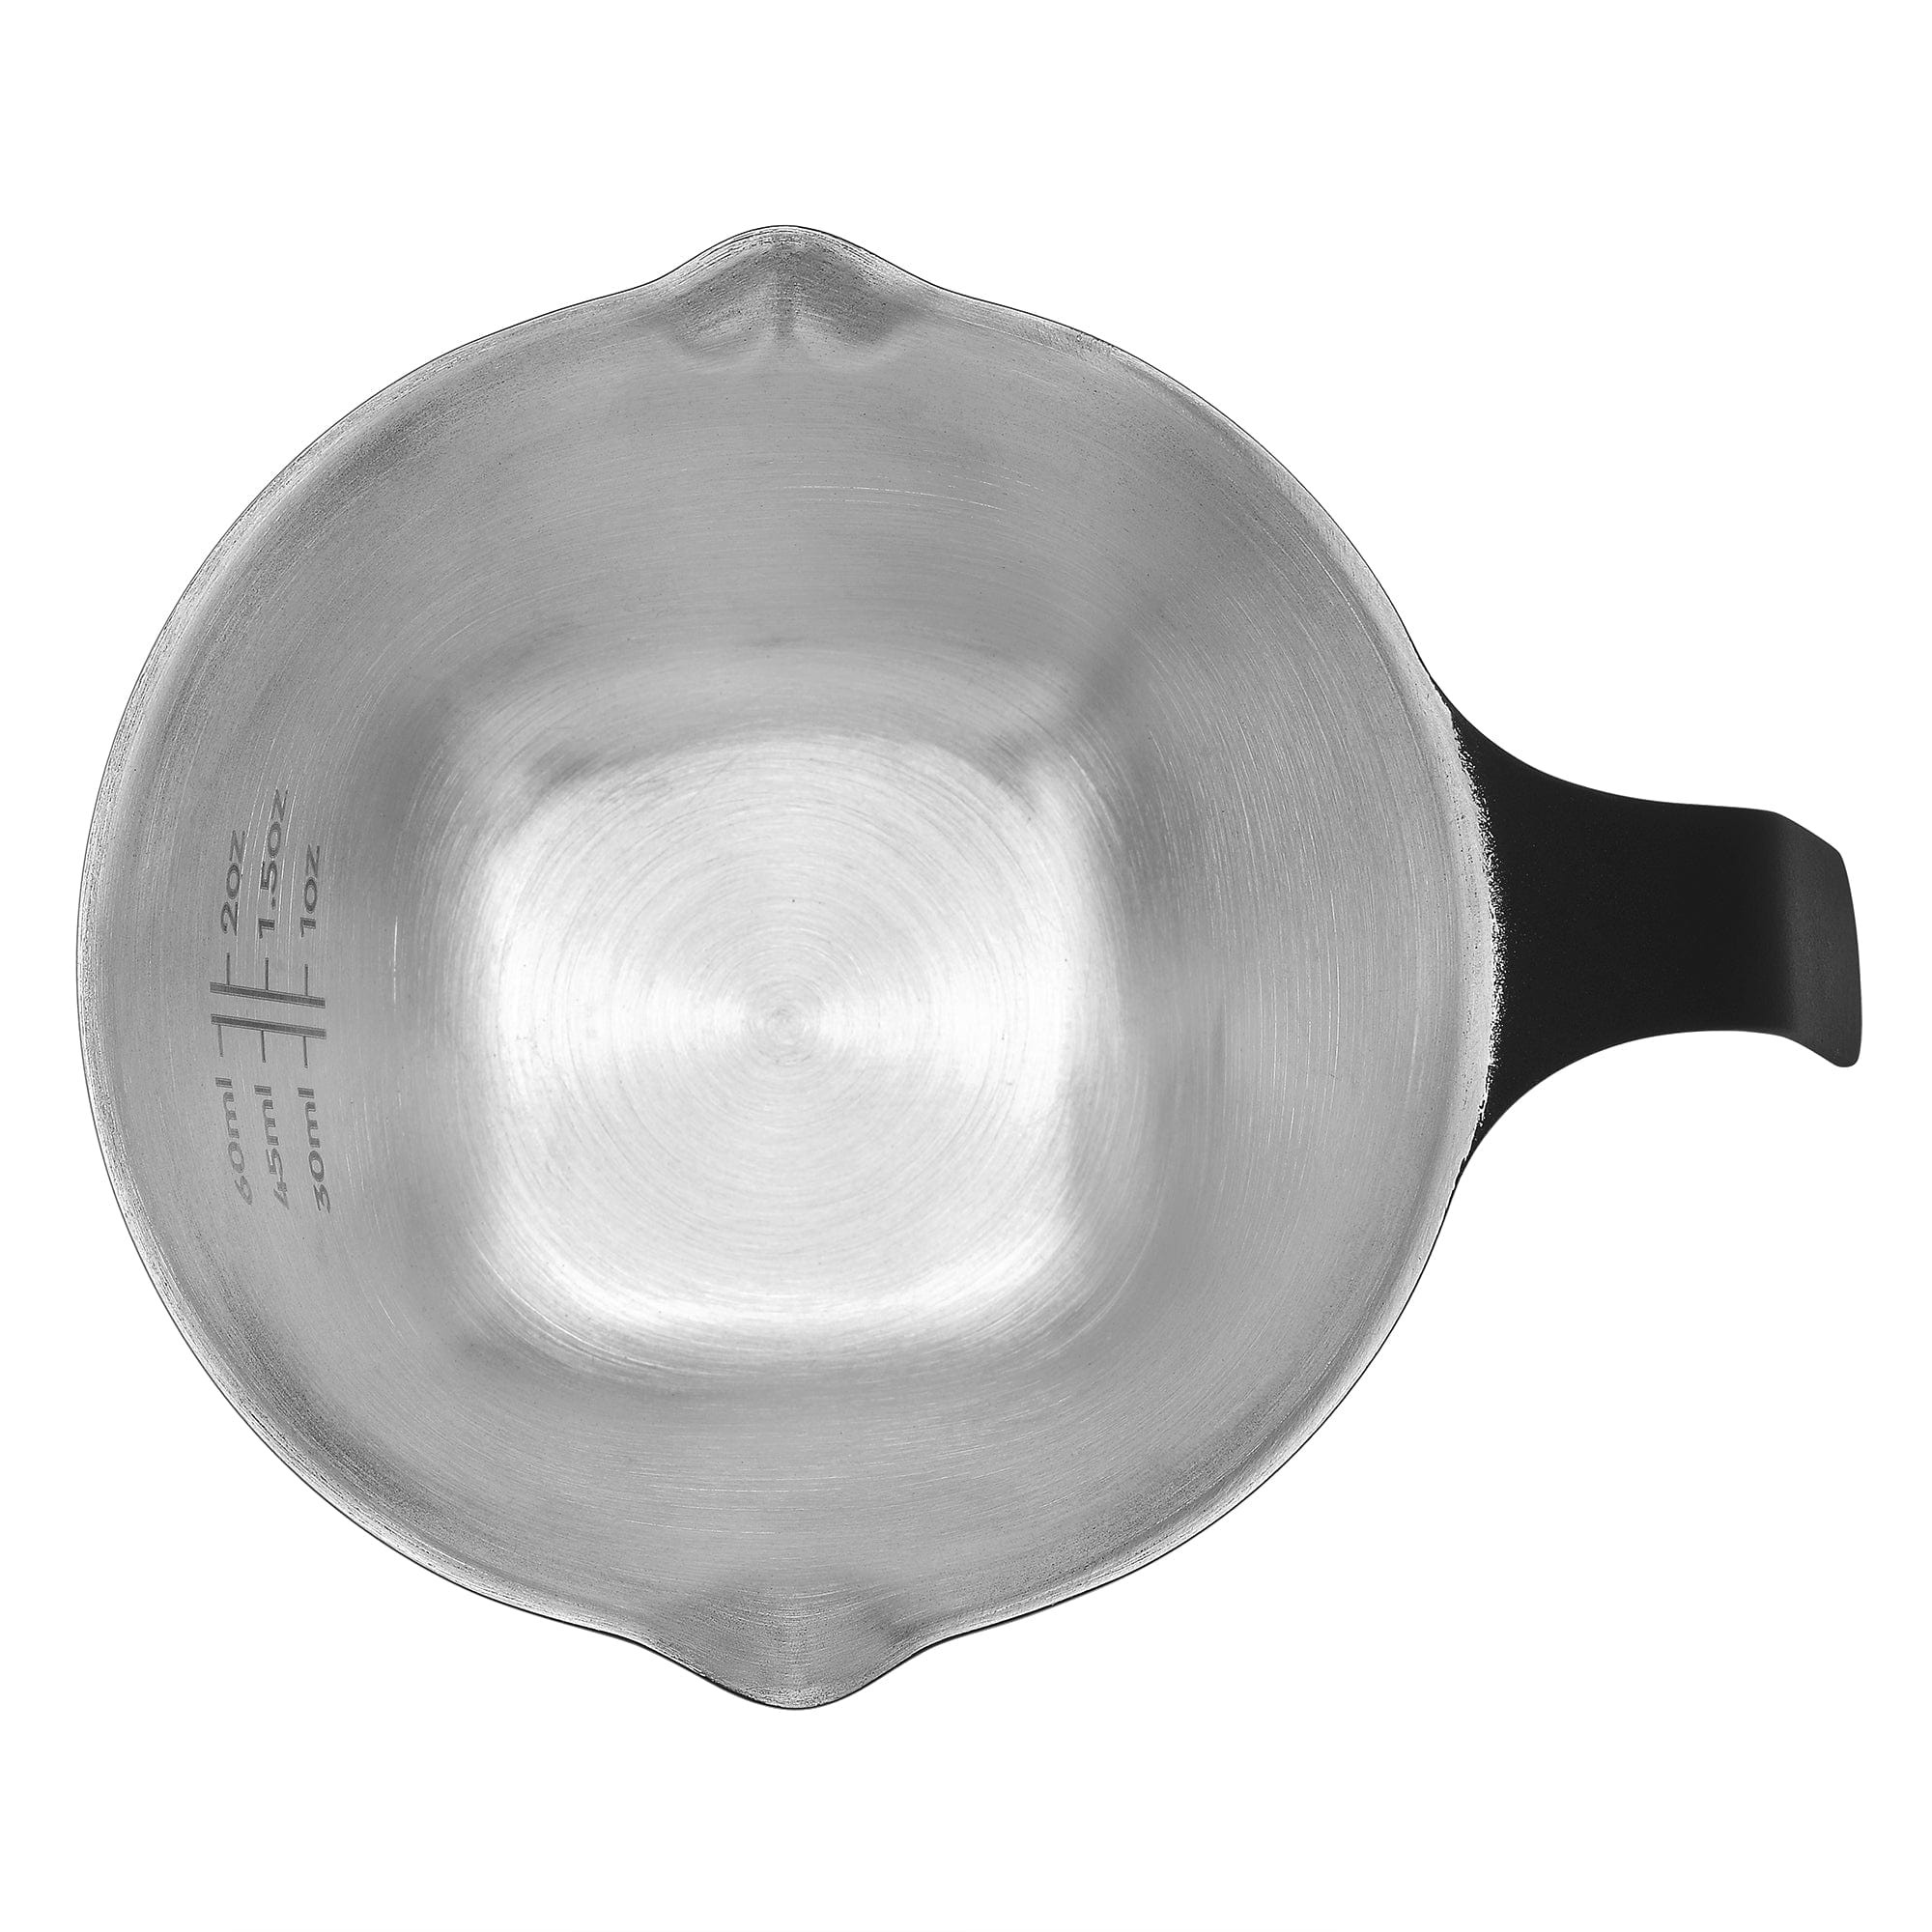 Normcore / Espresso Measuring Cup - 304 Stainless Steel